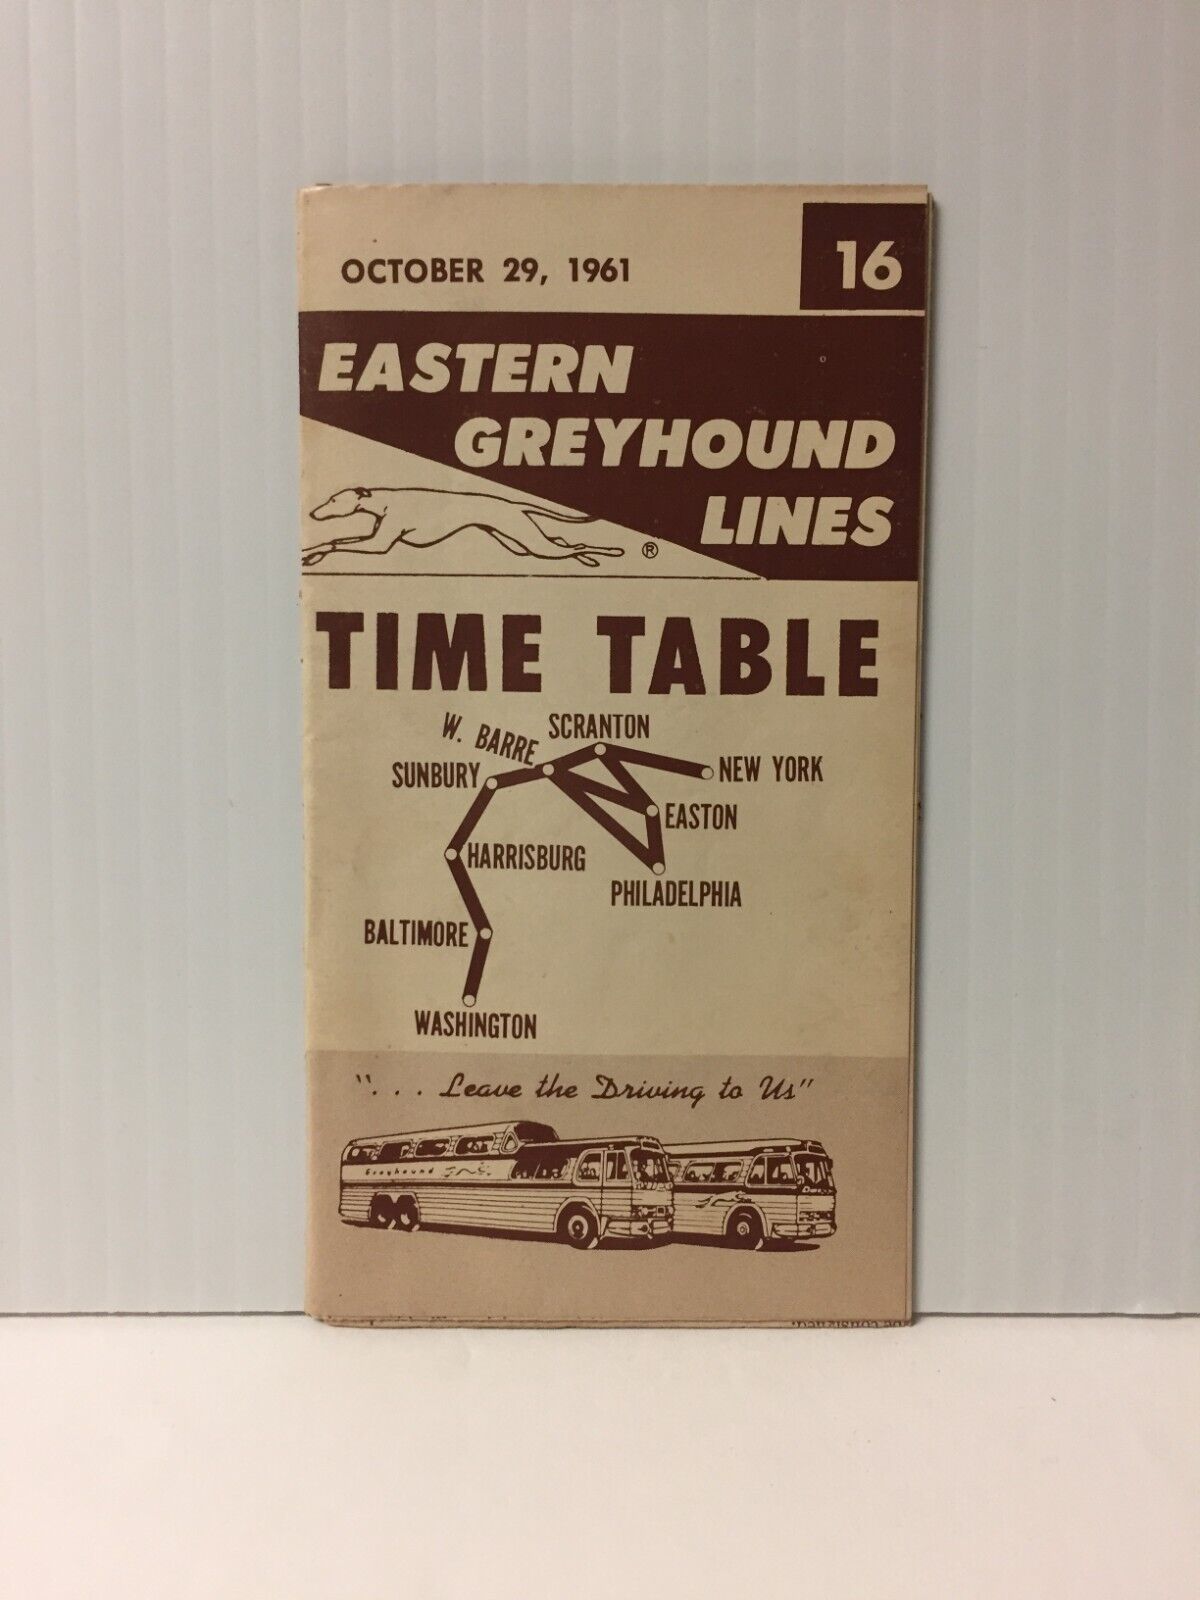 Vintage Eastern Greyhound Lines Schedule Time Table #16 -- October 29, 1961